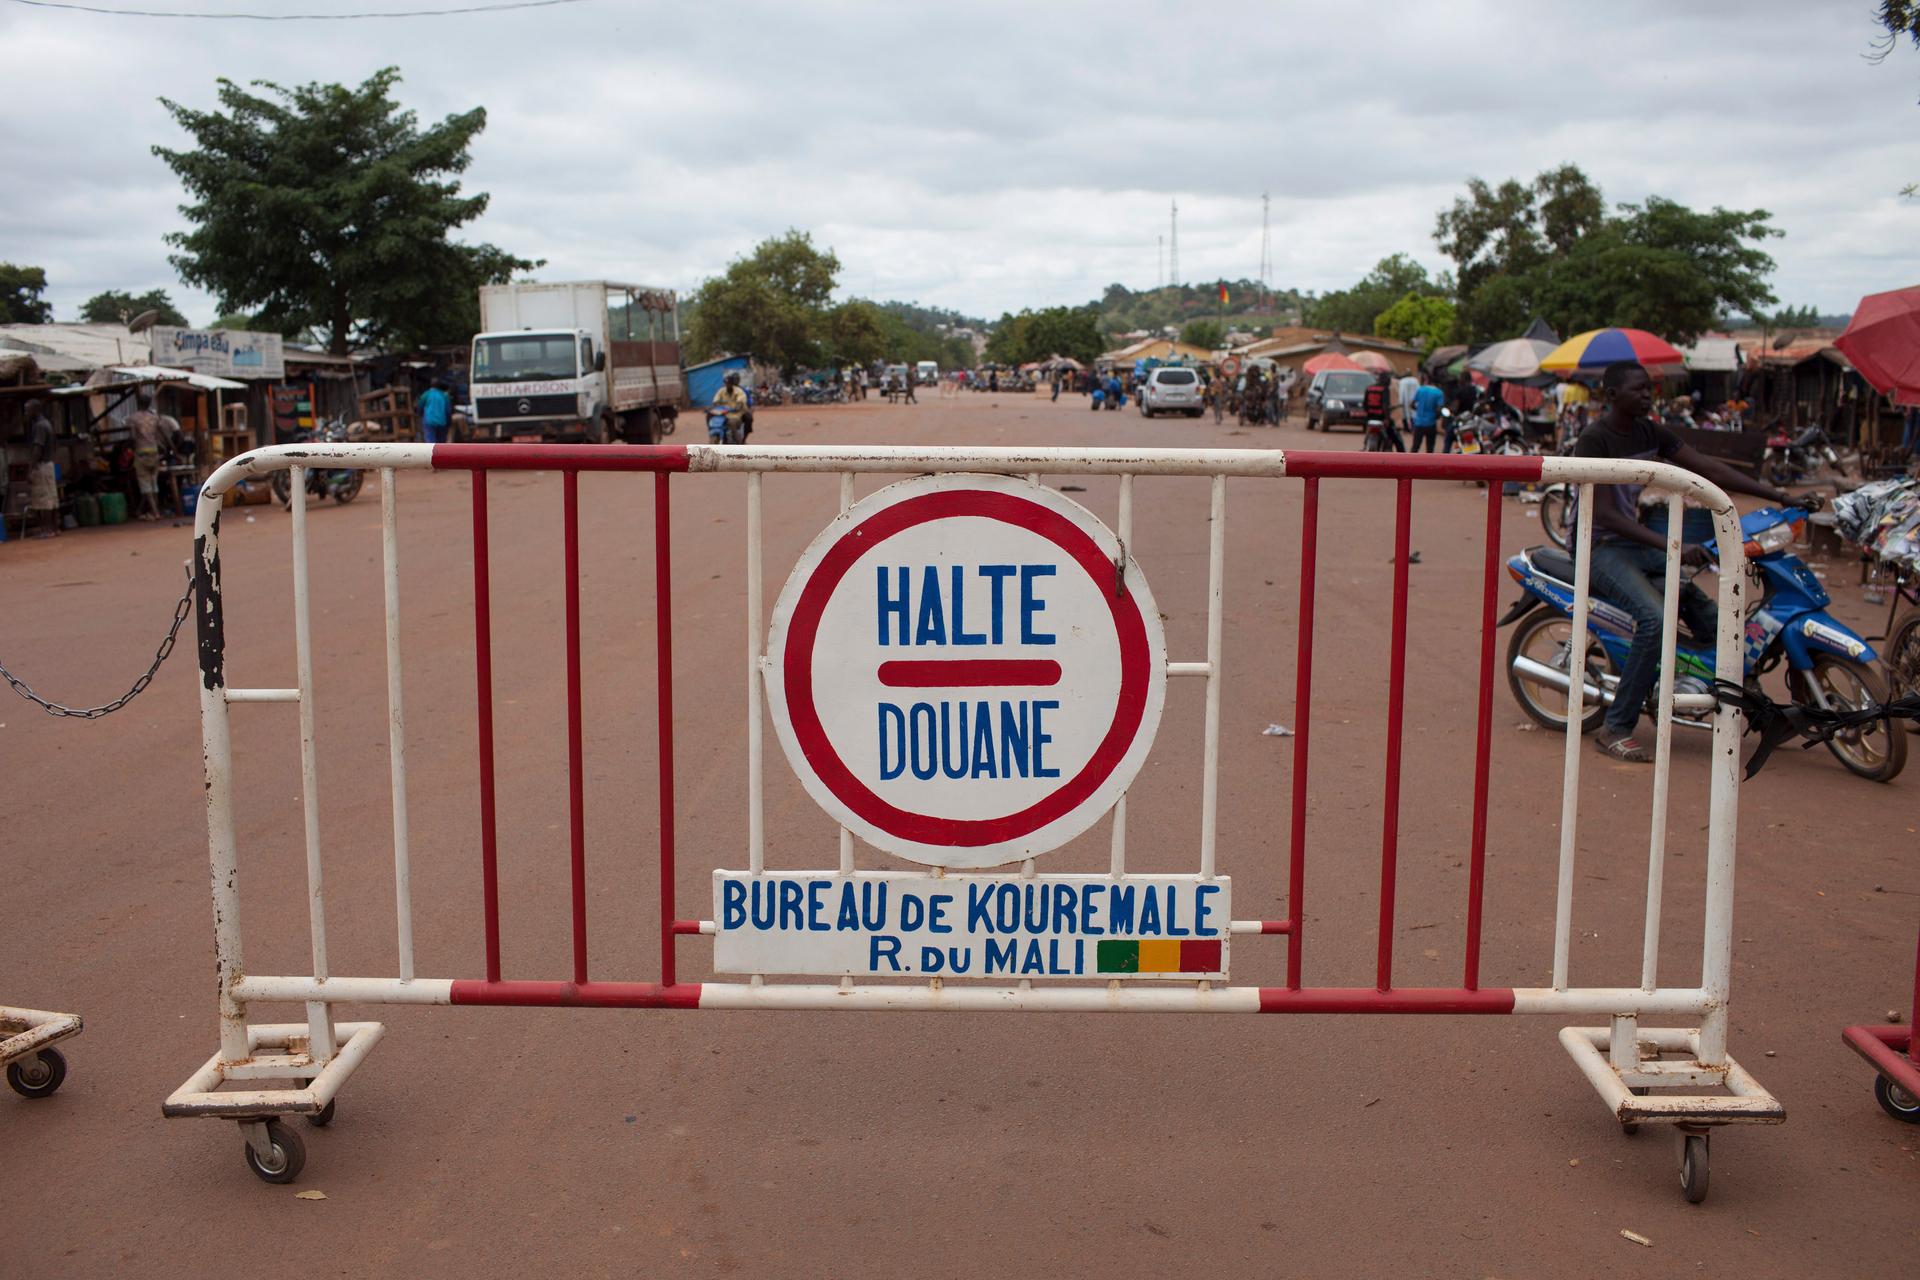 A sign is seen at the border with Guinea in Kouremale, October 2, 2014. The worst Ebola outbreak on record was first confirmed in Guinea in March but it has since spread across most of Liberia and Sierra Leone, killing more than 3,300 people, overwhelming